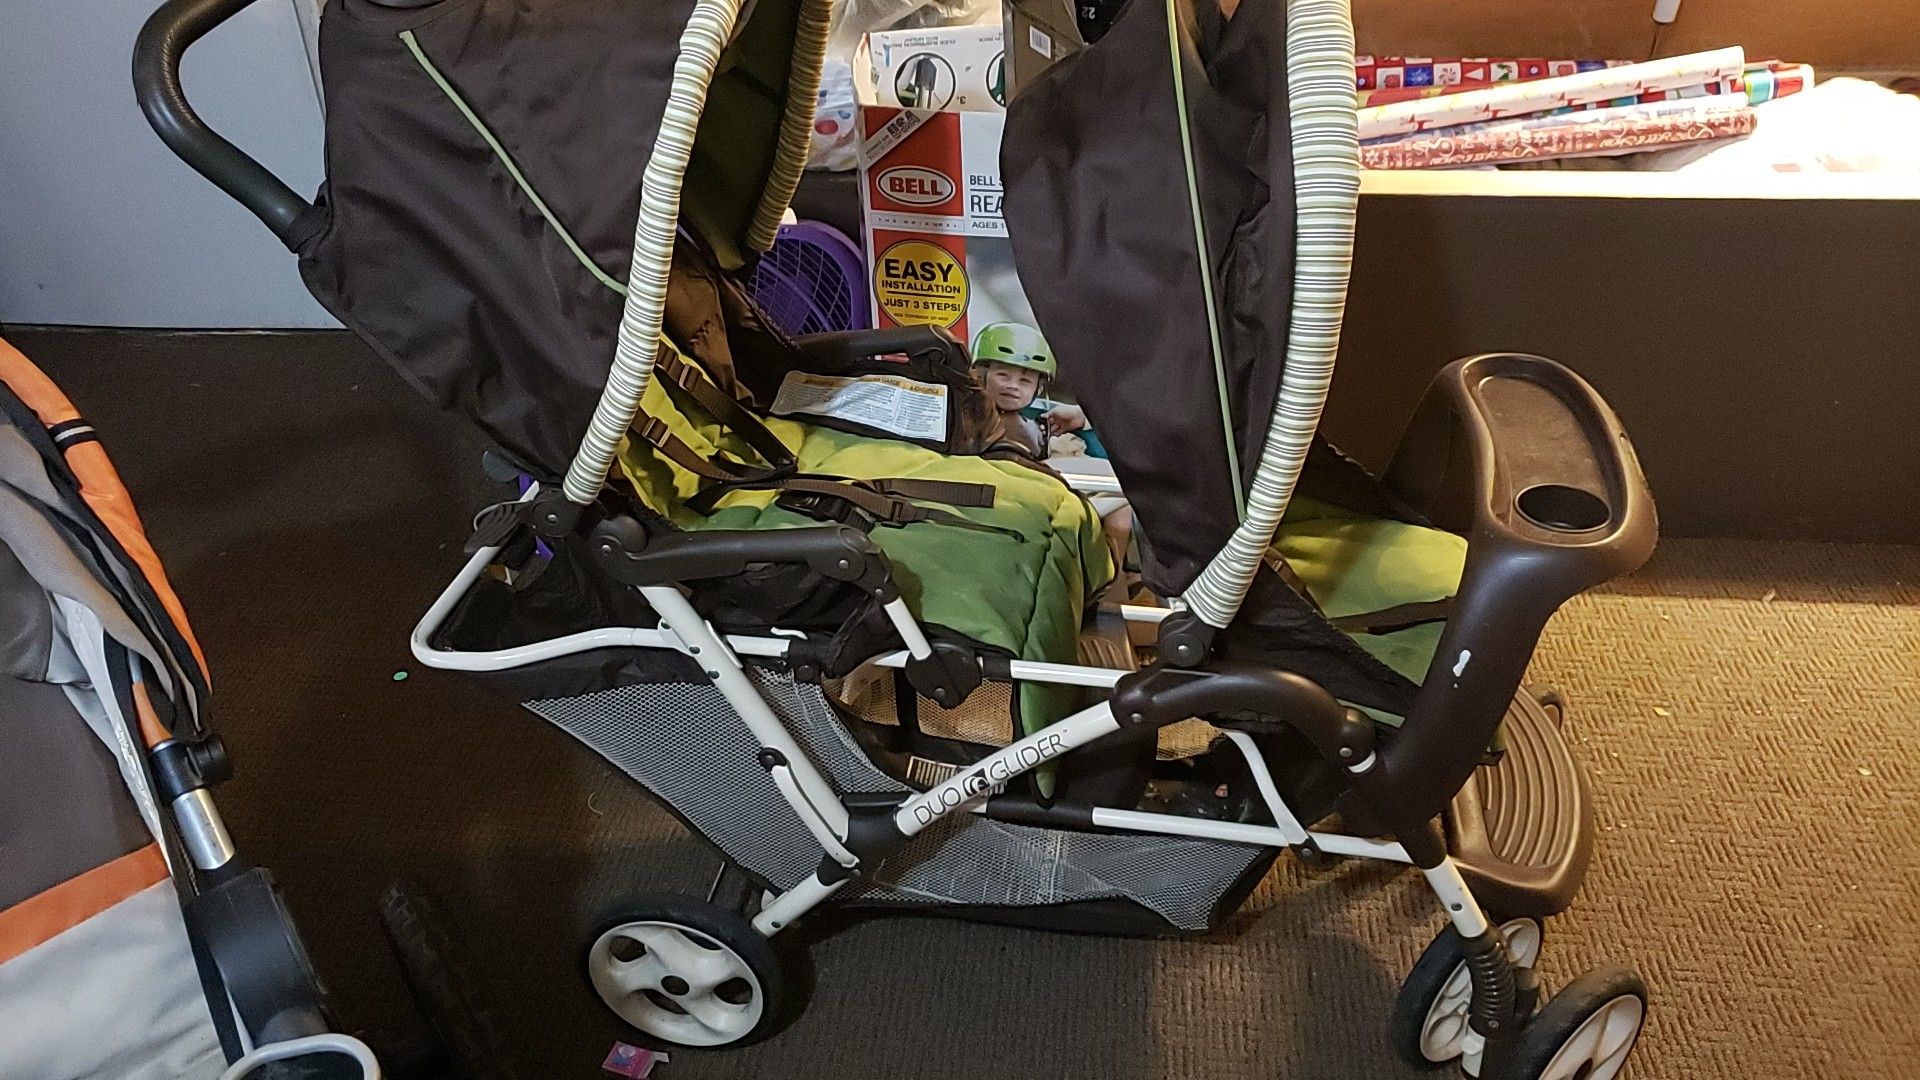 Graco duo glider double stroller